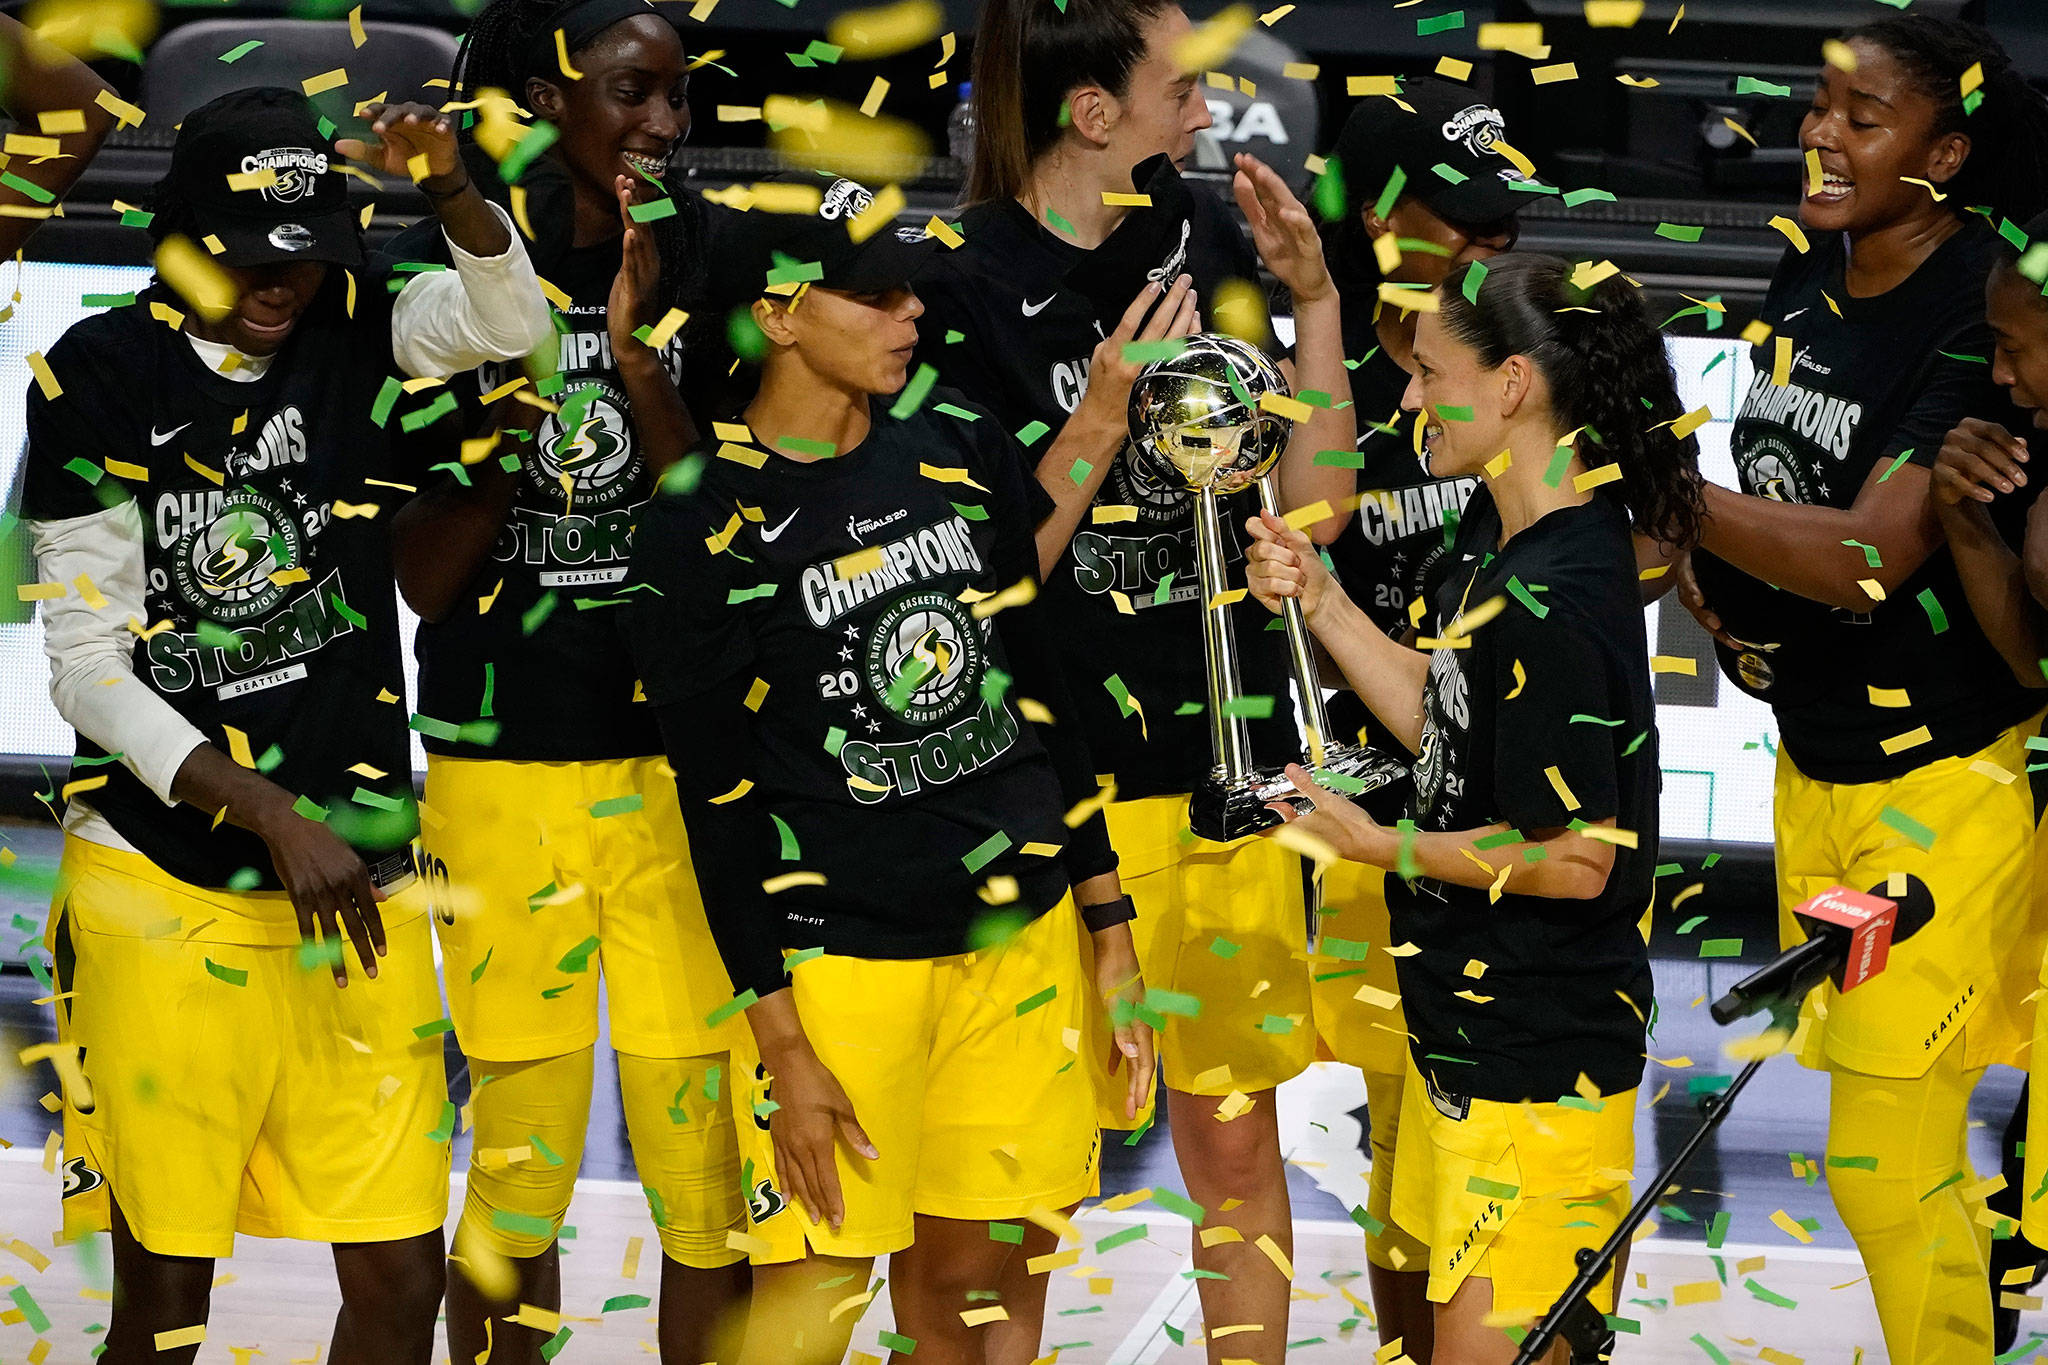 Storm guard Sue Bird holds the championship trophy to after Seattle defeated the Las Vegas Aces to win the WNBA title on Oct. 6, 2020, in Bradenton, Fla. (AP Photo/Chris O’Meara)